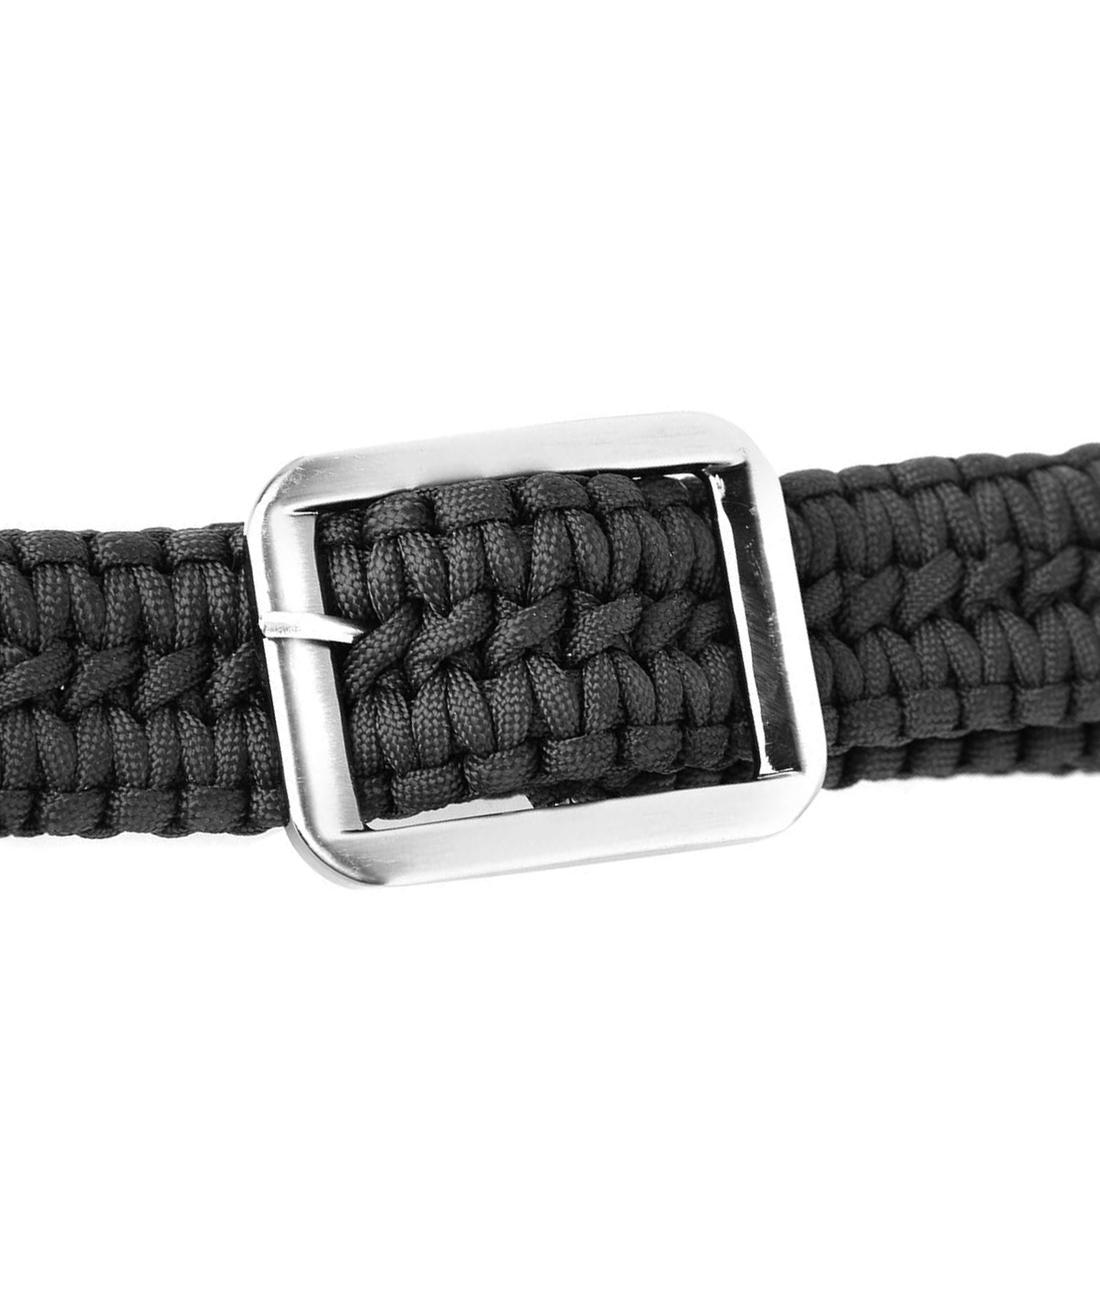 Grtel Paracord